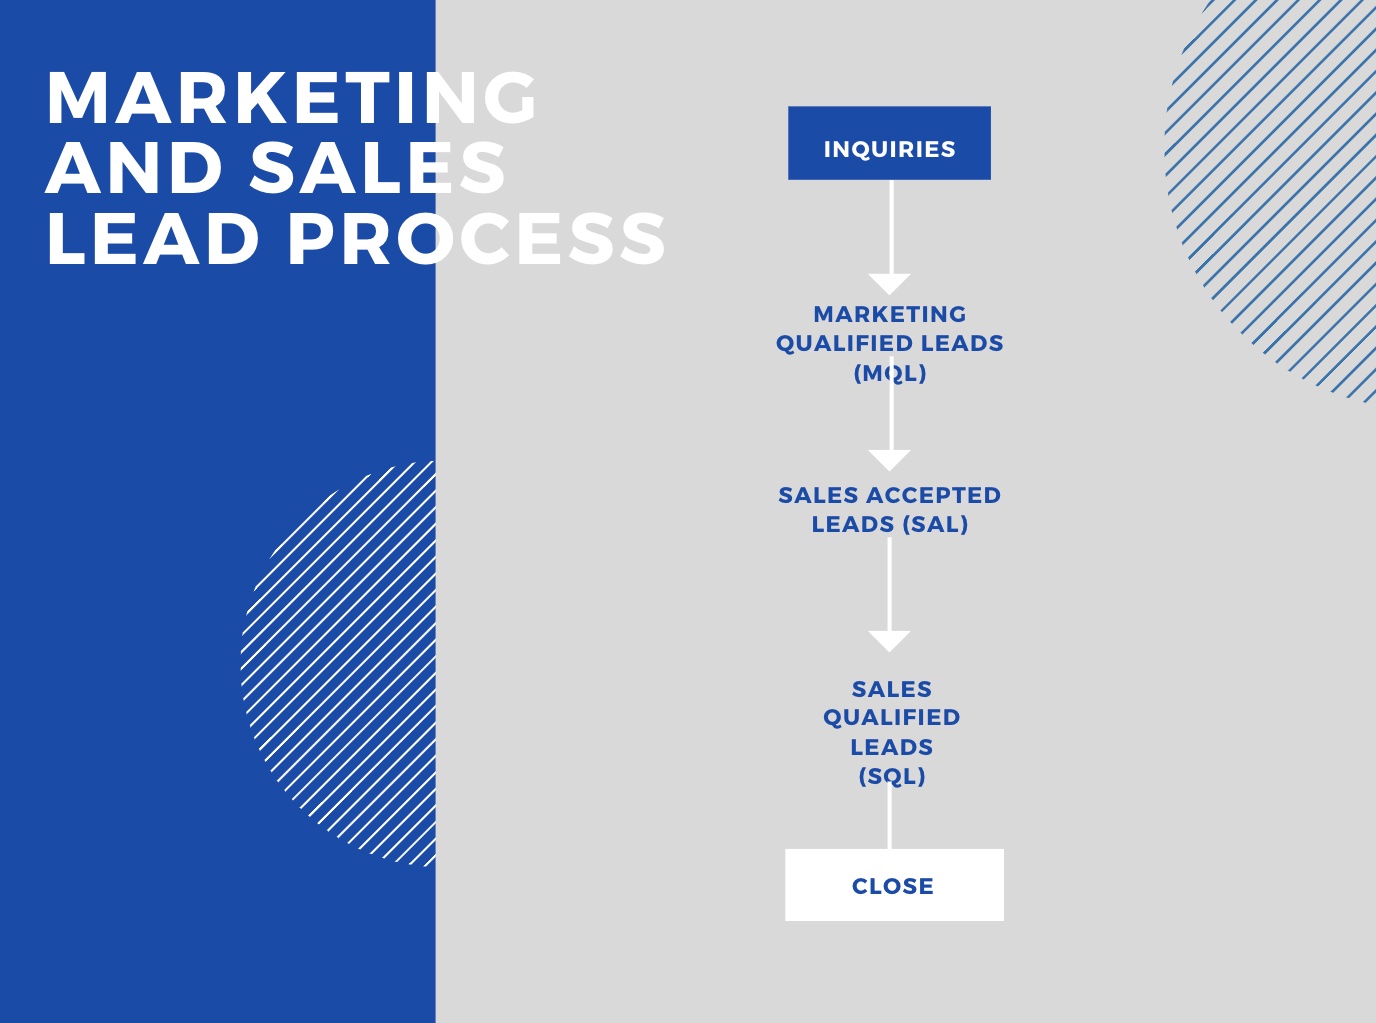 Flow chart showing the movement of leads between the market qualified leads, sales accepted leads, and sales qualified leads stages.